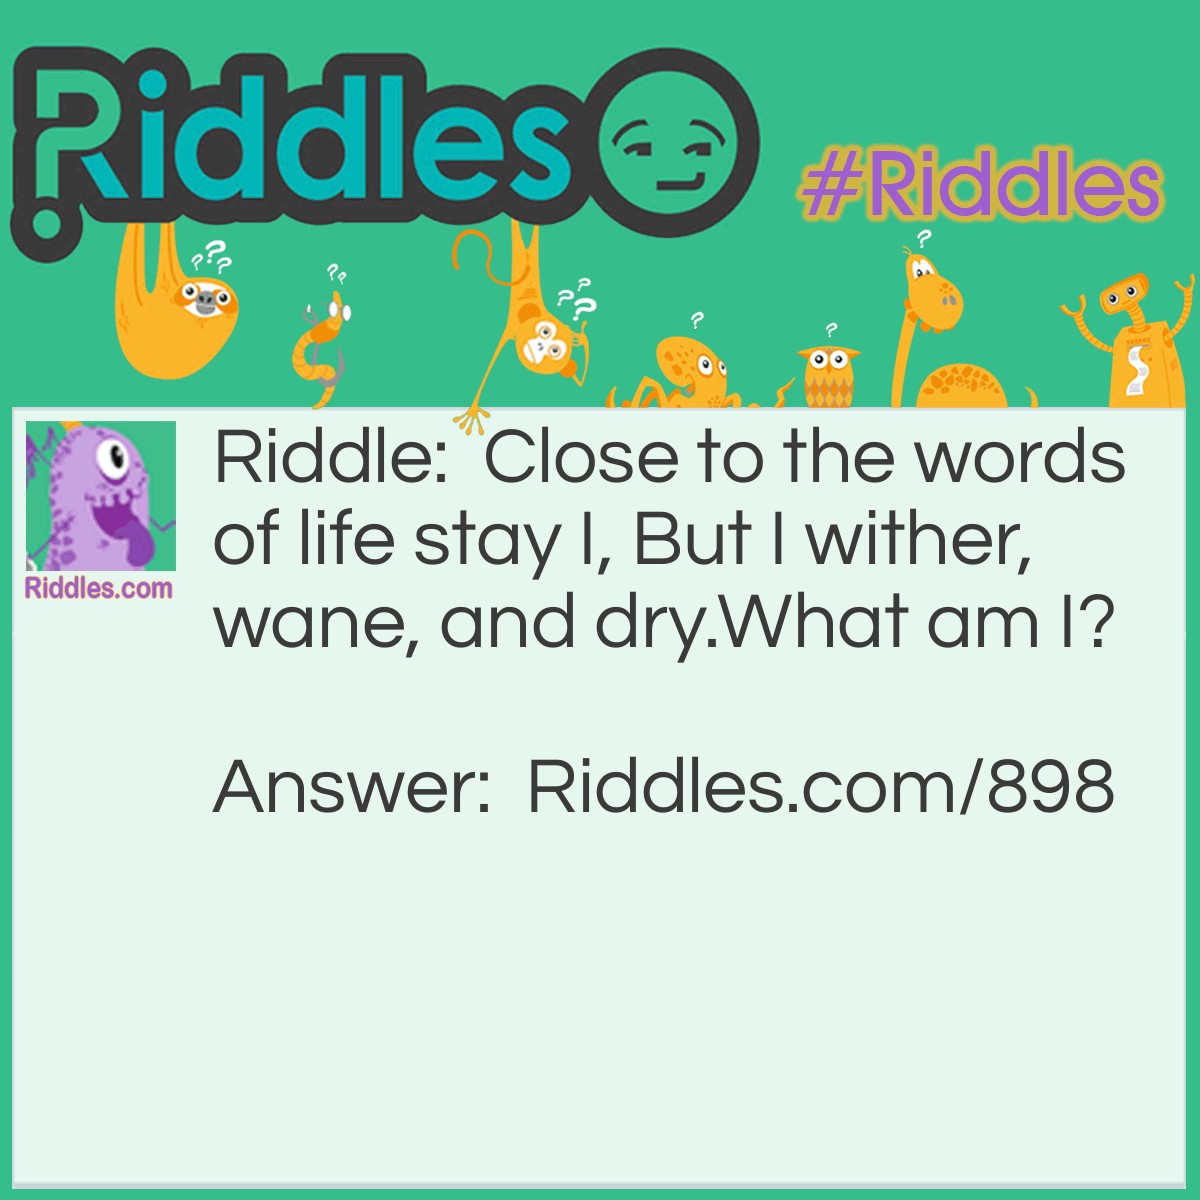 Riddle: Close to the words of life stay I, But I wither, wane, and dry.
What am I? Answer: A Bible-pressed flower.